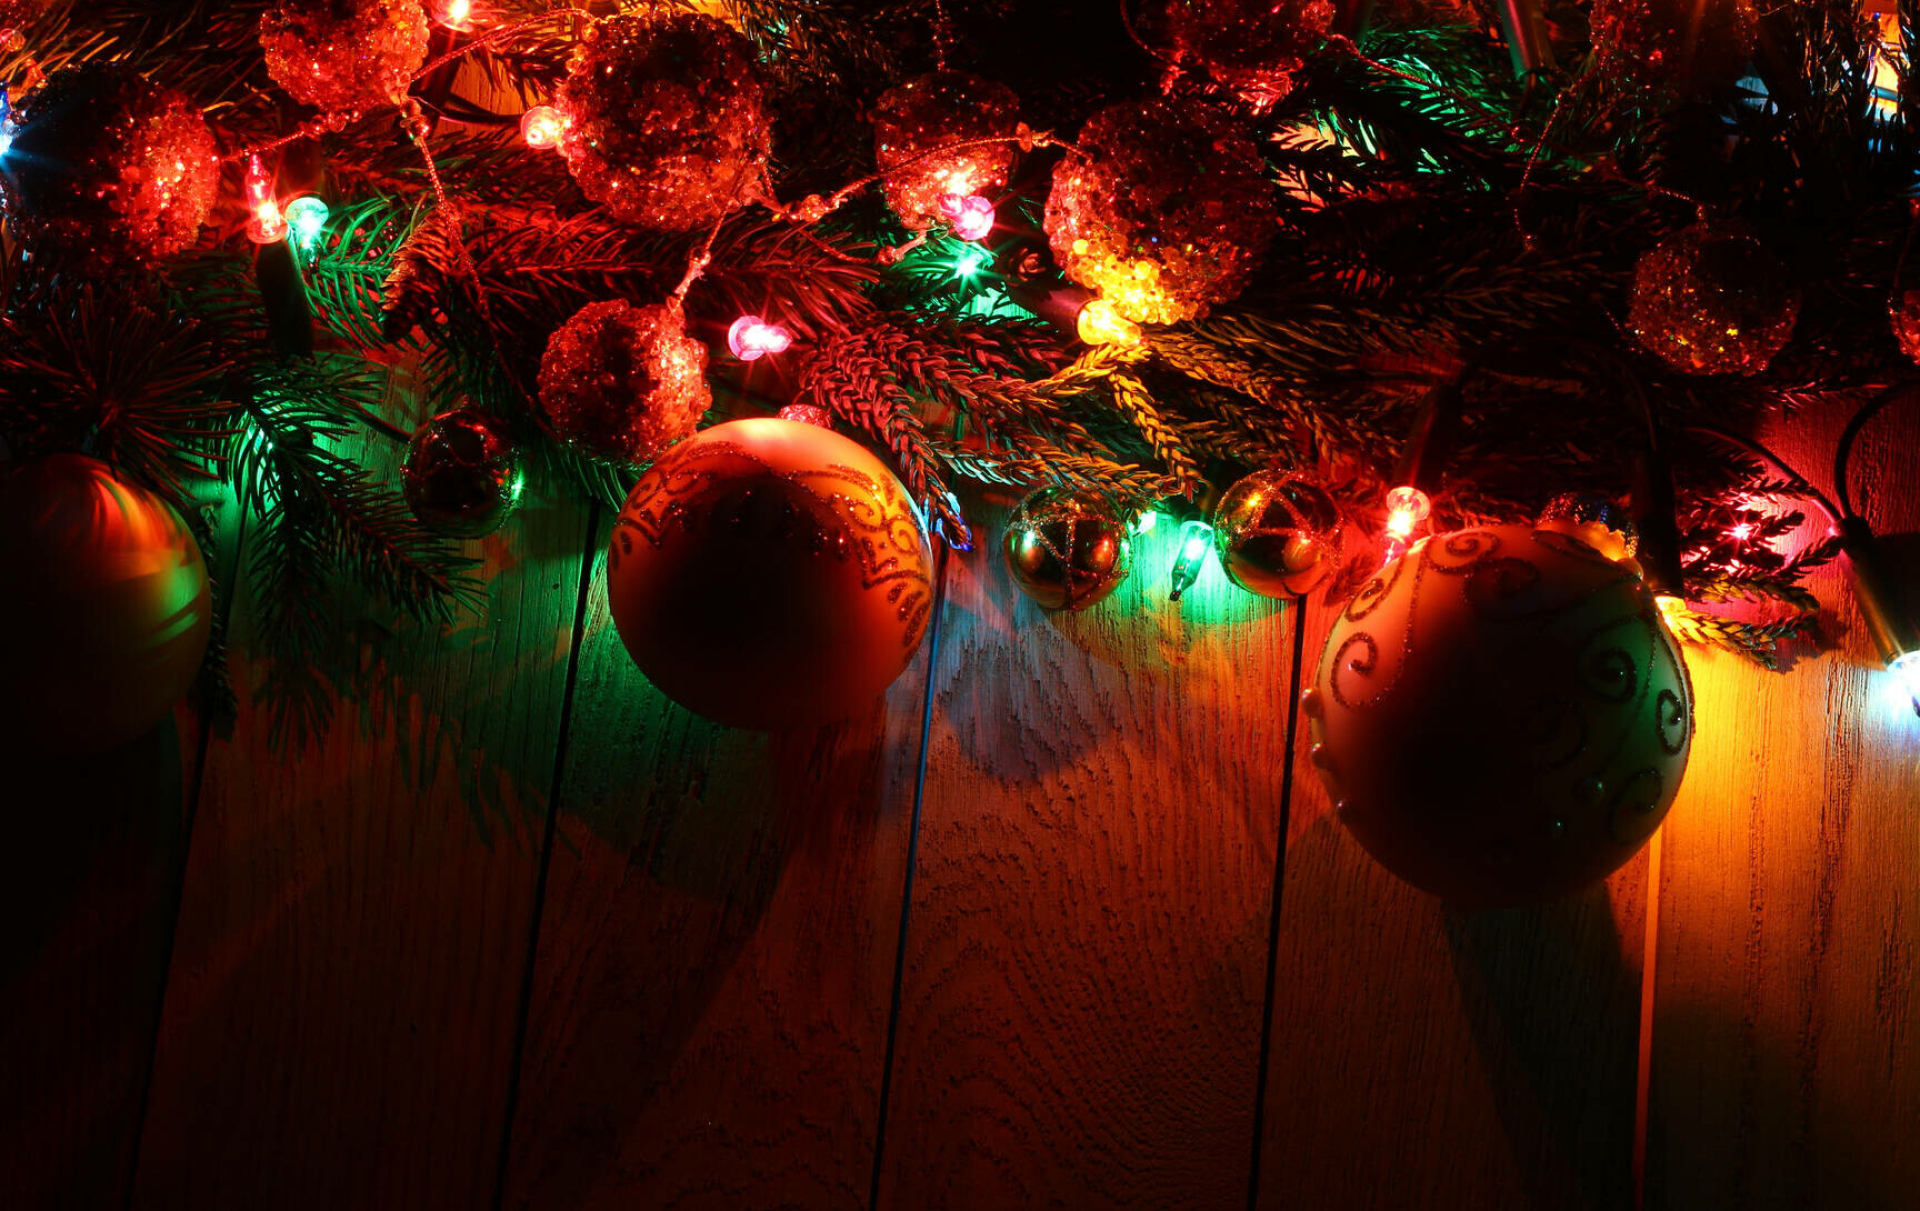 Garland: Small colored electric bulbs strung together and used for decoration. 1920x1220 HD Wallpaper.